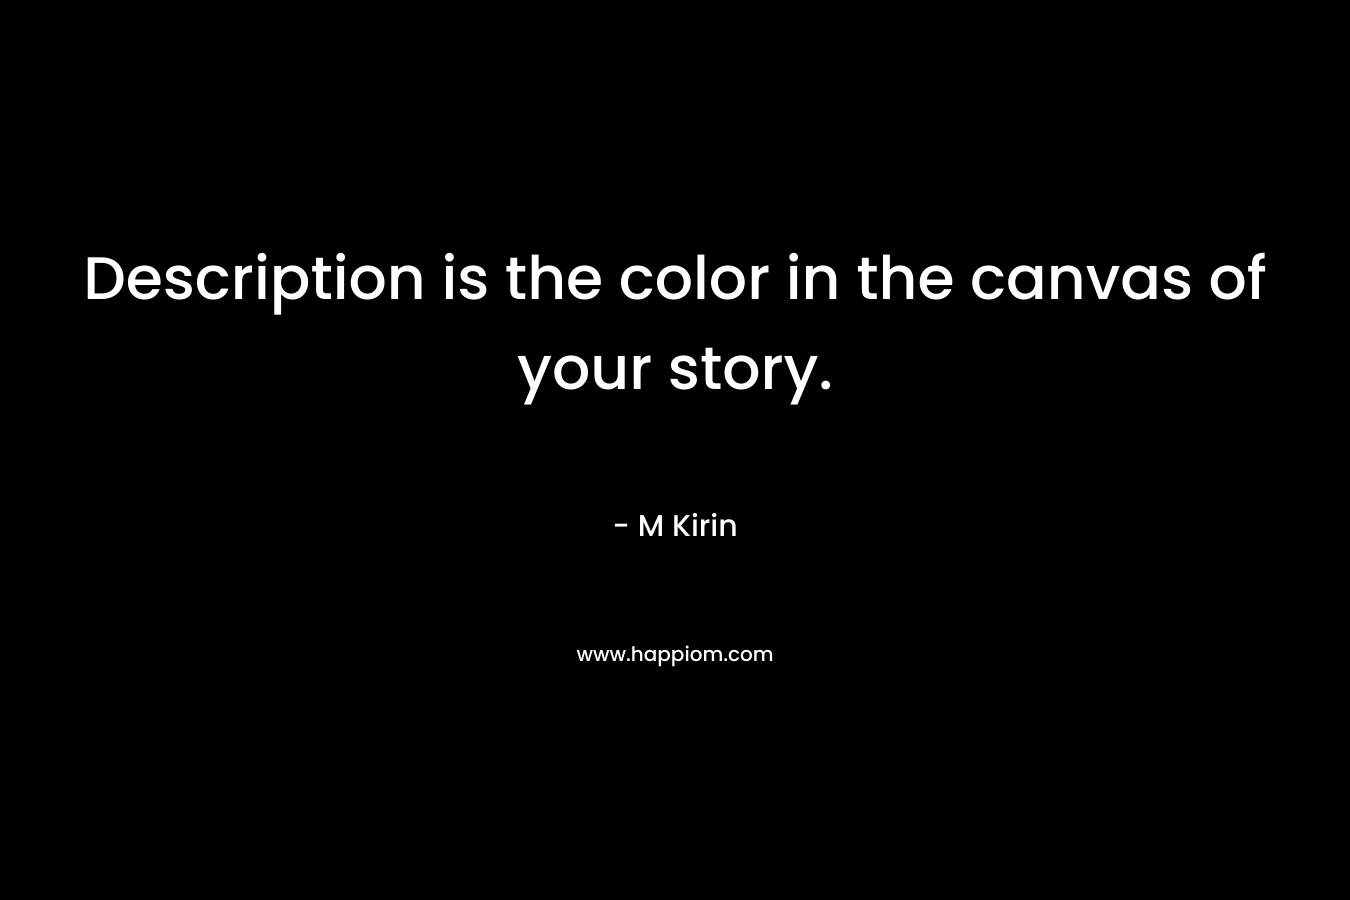 Description is the color in the canvas of your story.